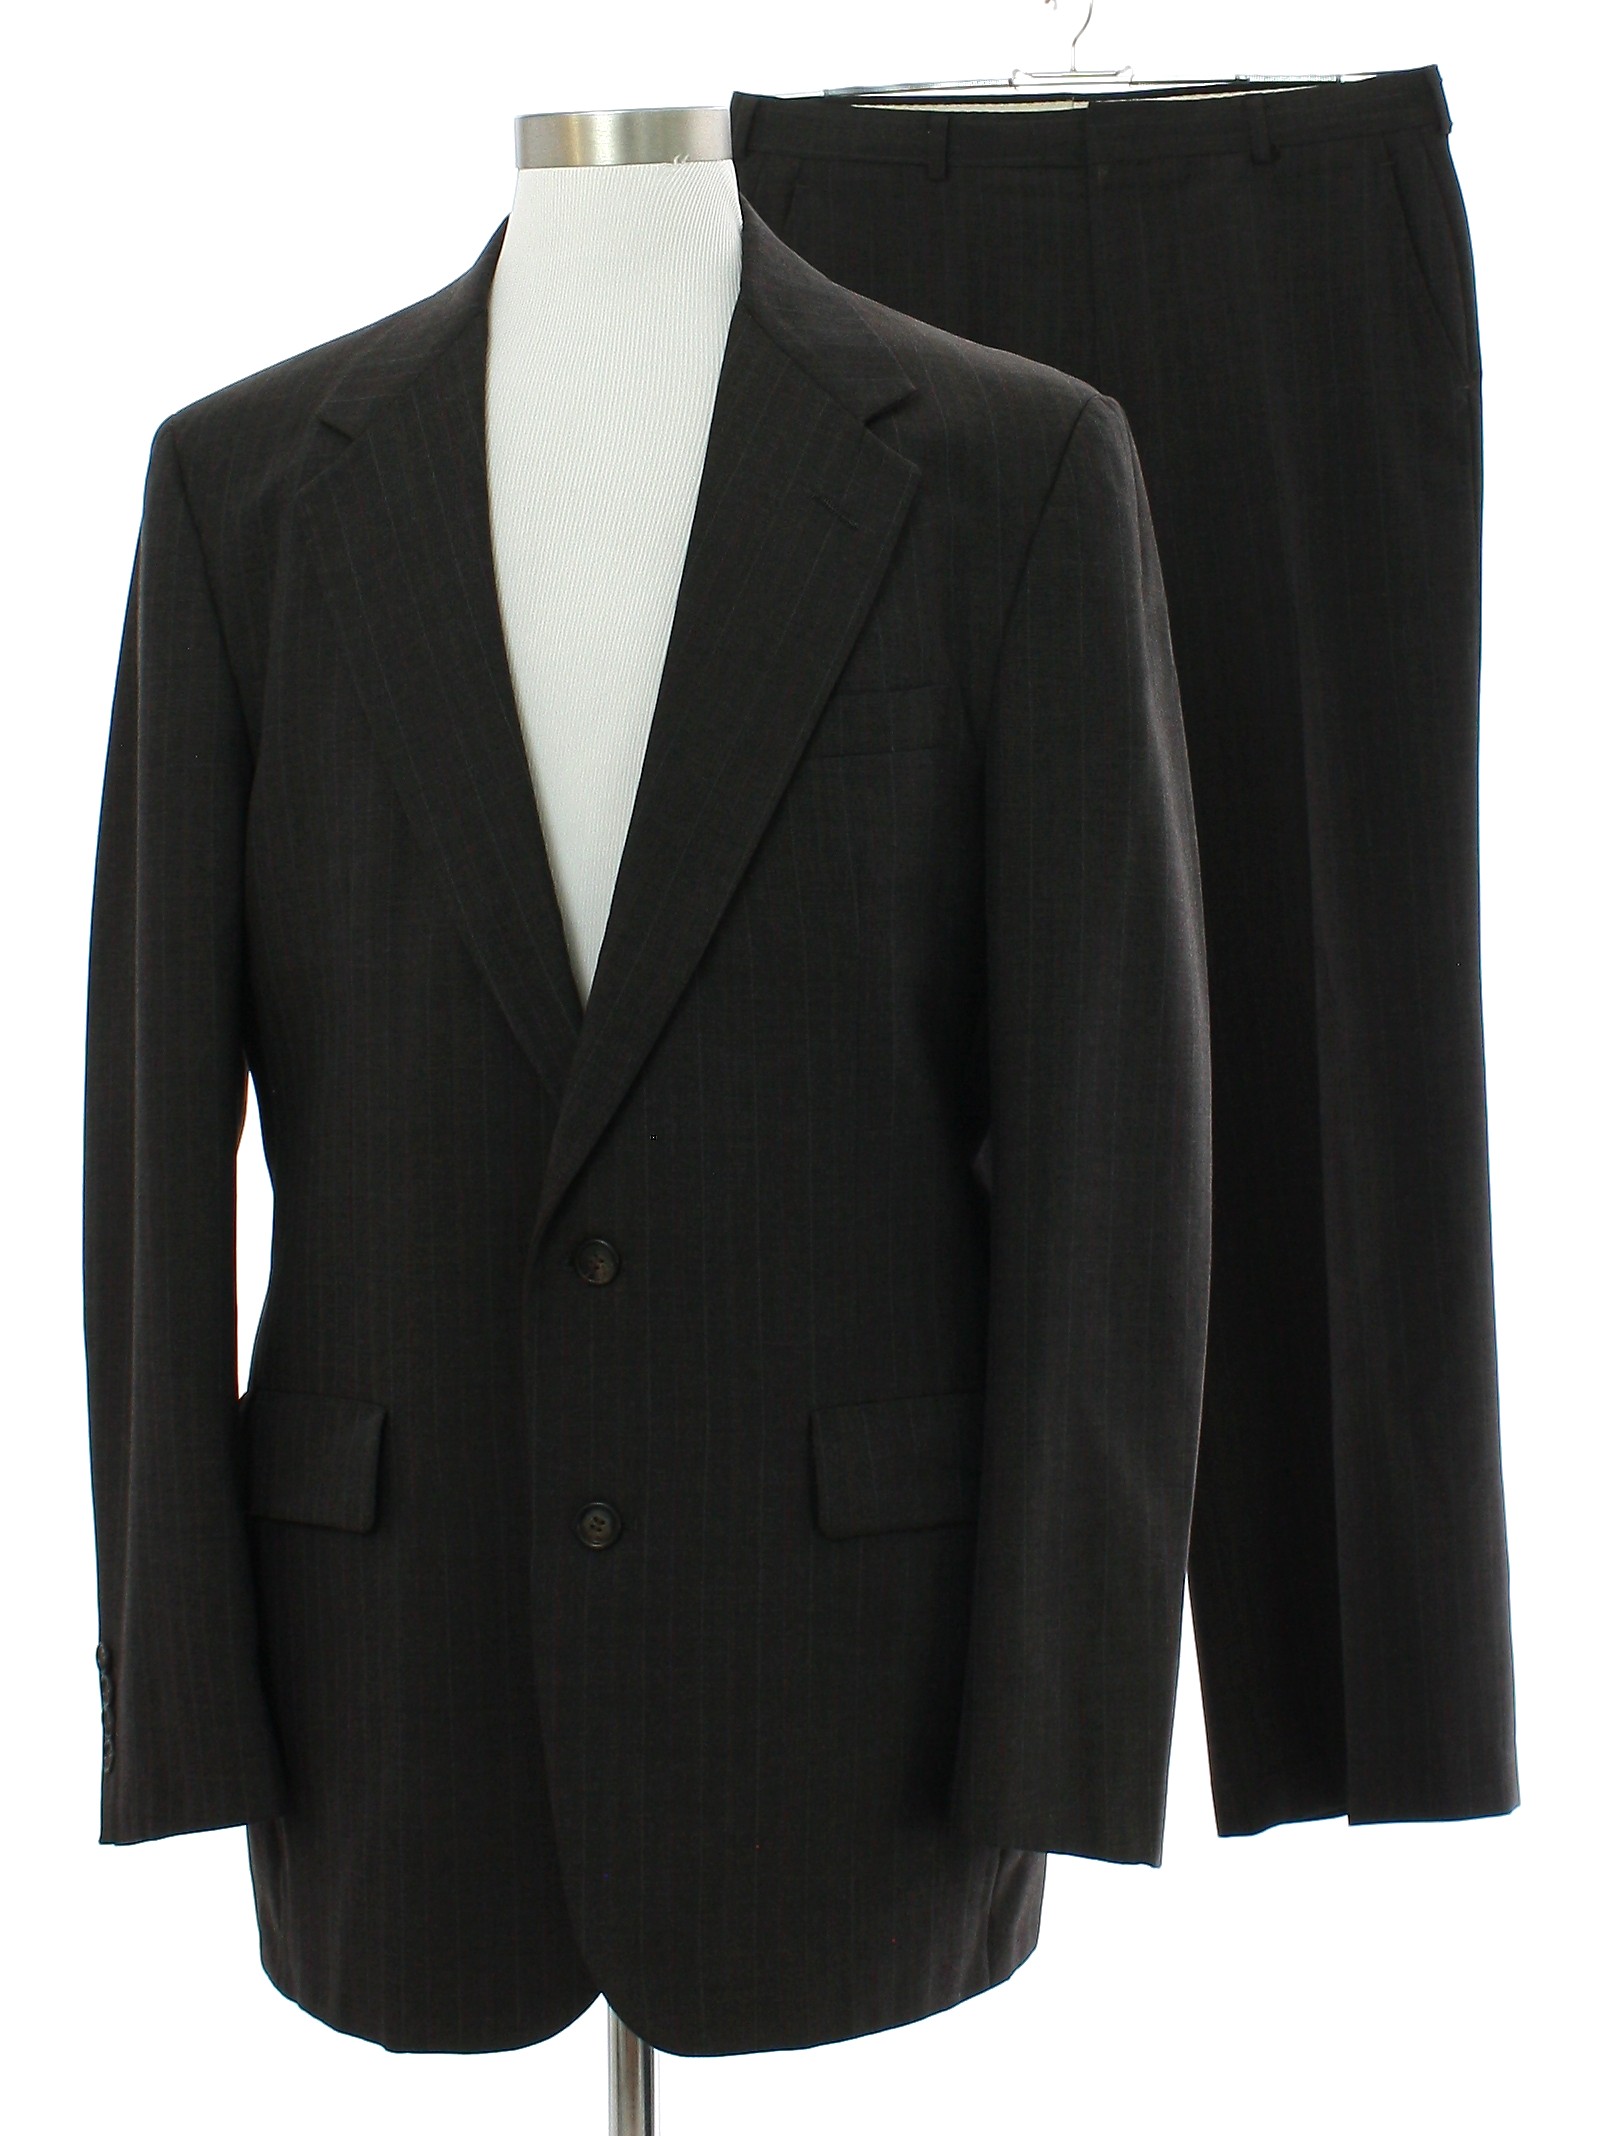 John Weitz by Palm Beach for Sterns Eighties Vintage Suit: 80s -John ...